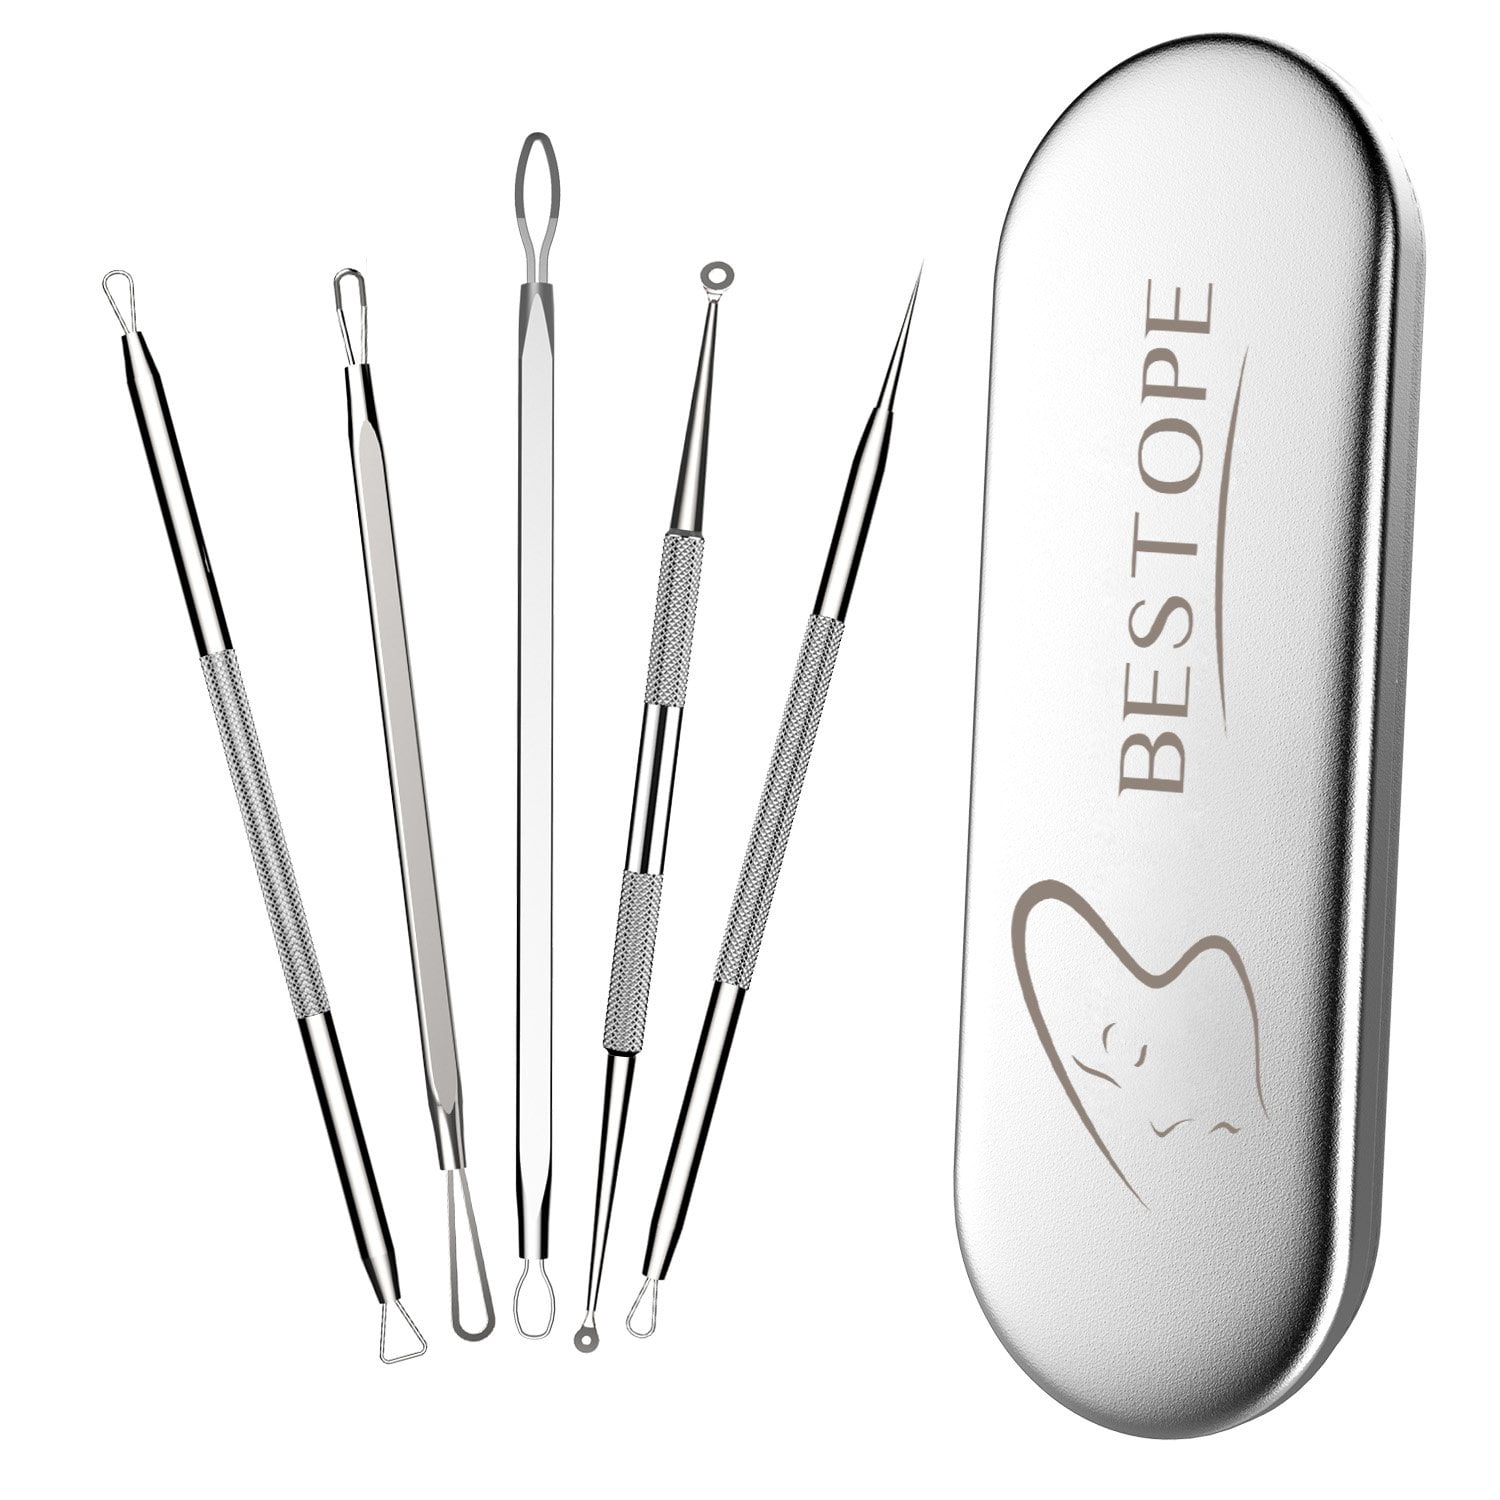 BESTOPE Blackhead Remover Pimple Comedone Extractor Tool Best Acne Kit - Treatment for Blemish, Popping, Zit Removing for Risk Free Nose Face Skin with Metal Case - Walmart.com